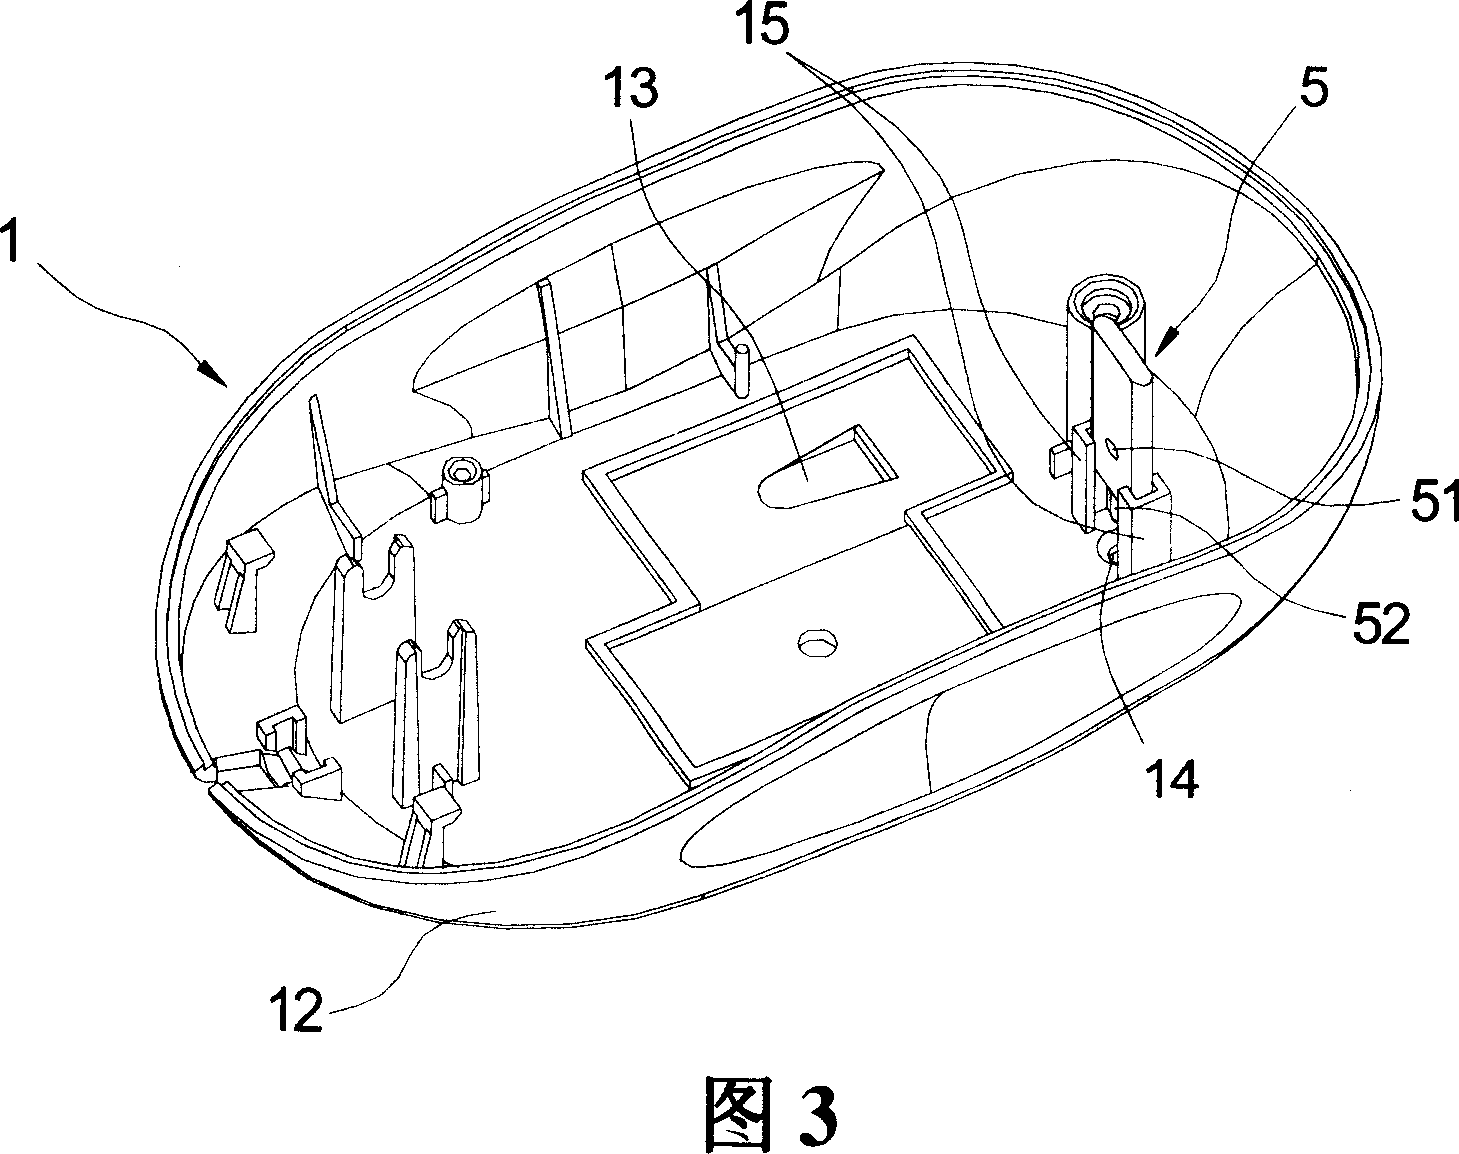 Optical mouse with shading device and operation method thereof